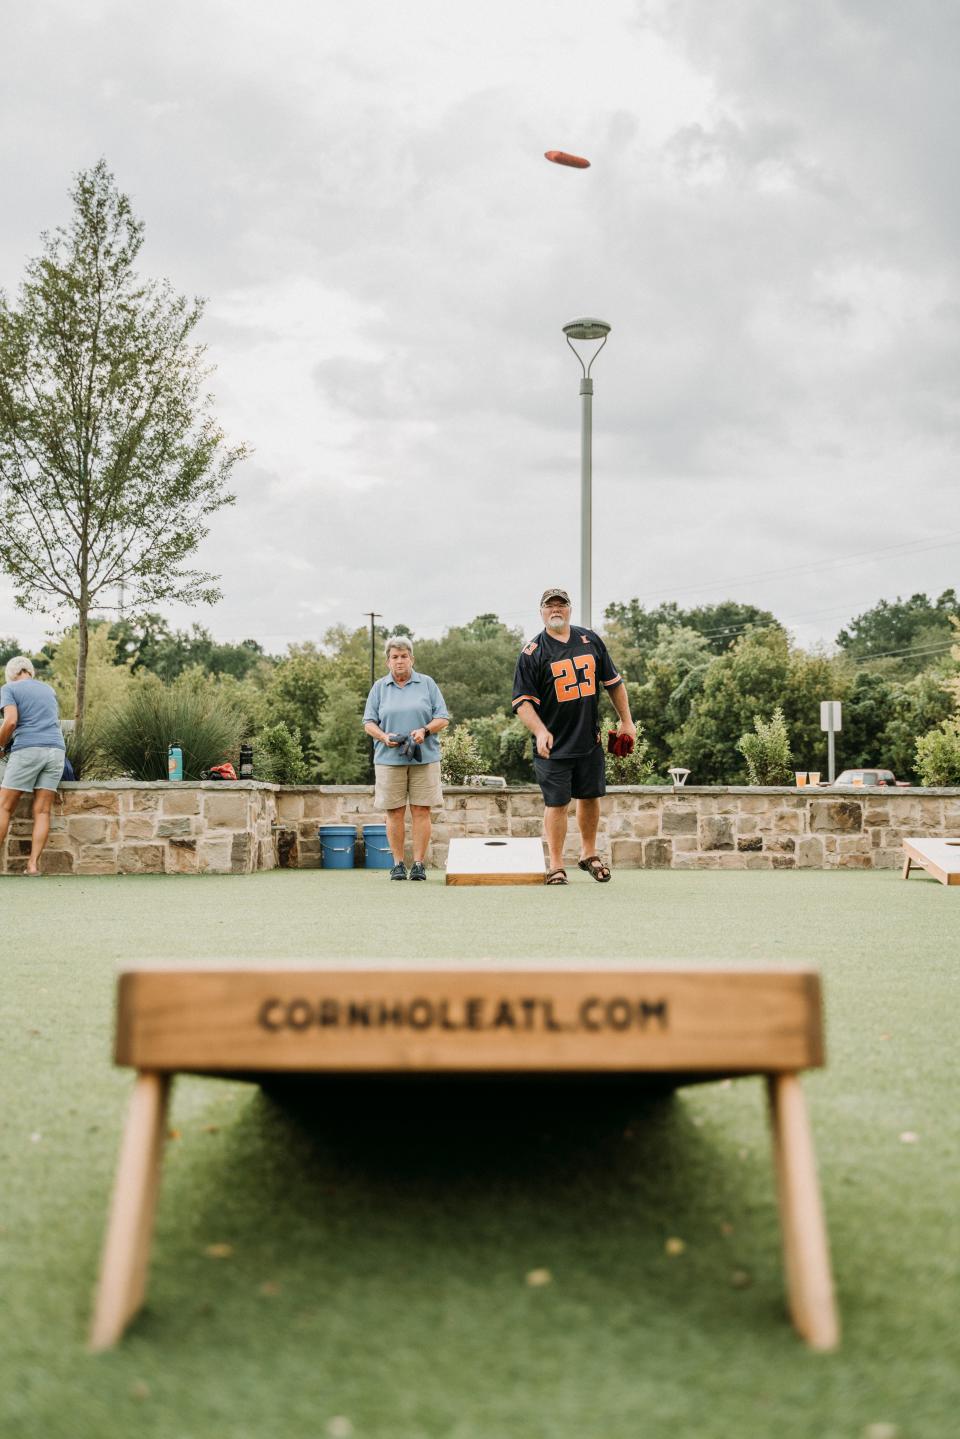 Cornhole ATL started back in 2011 and consisted of 4,500 players statewide that participate each season. This year, they're starting a league in Savannah at Eastern Wharf.